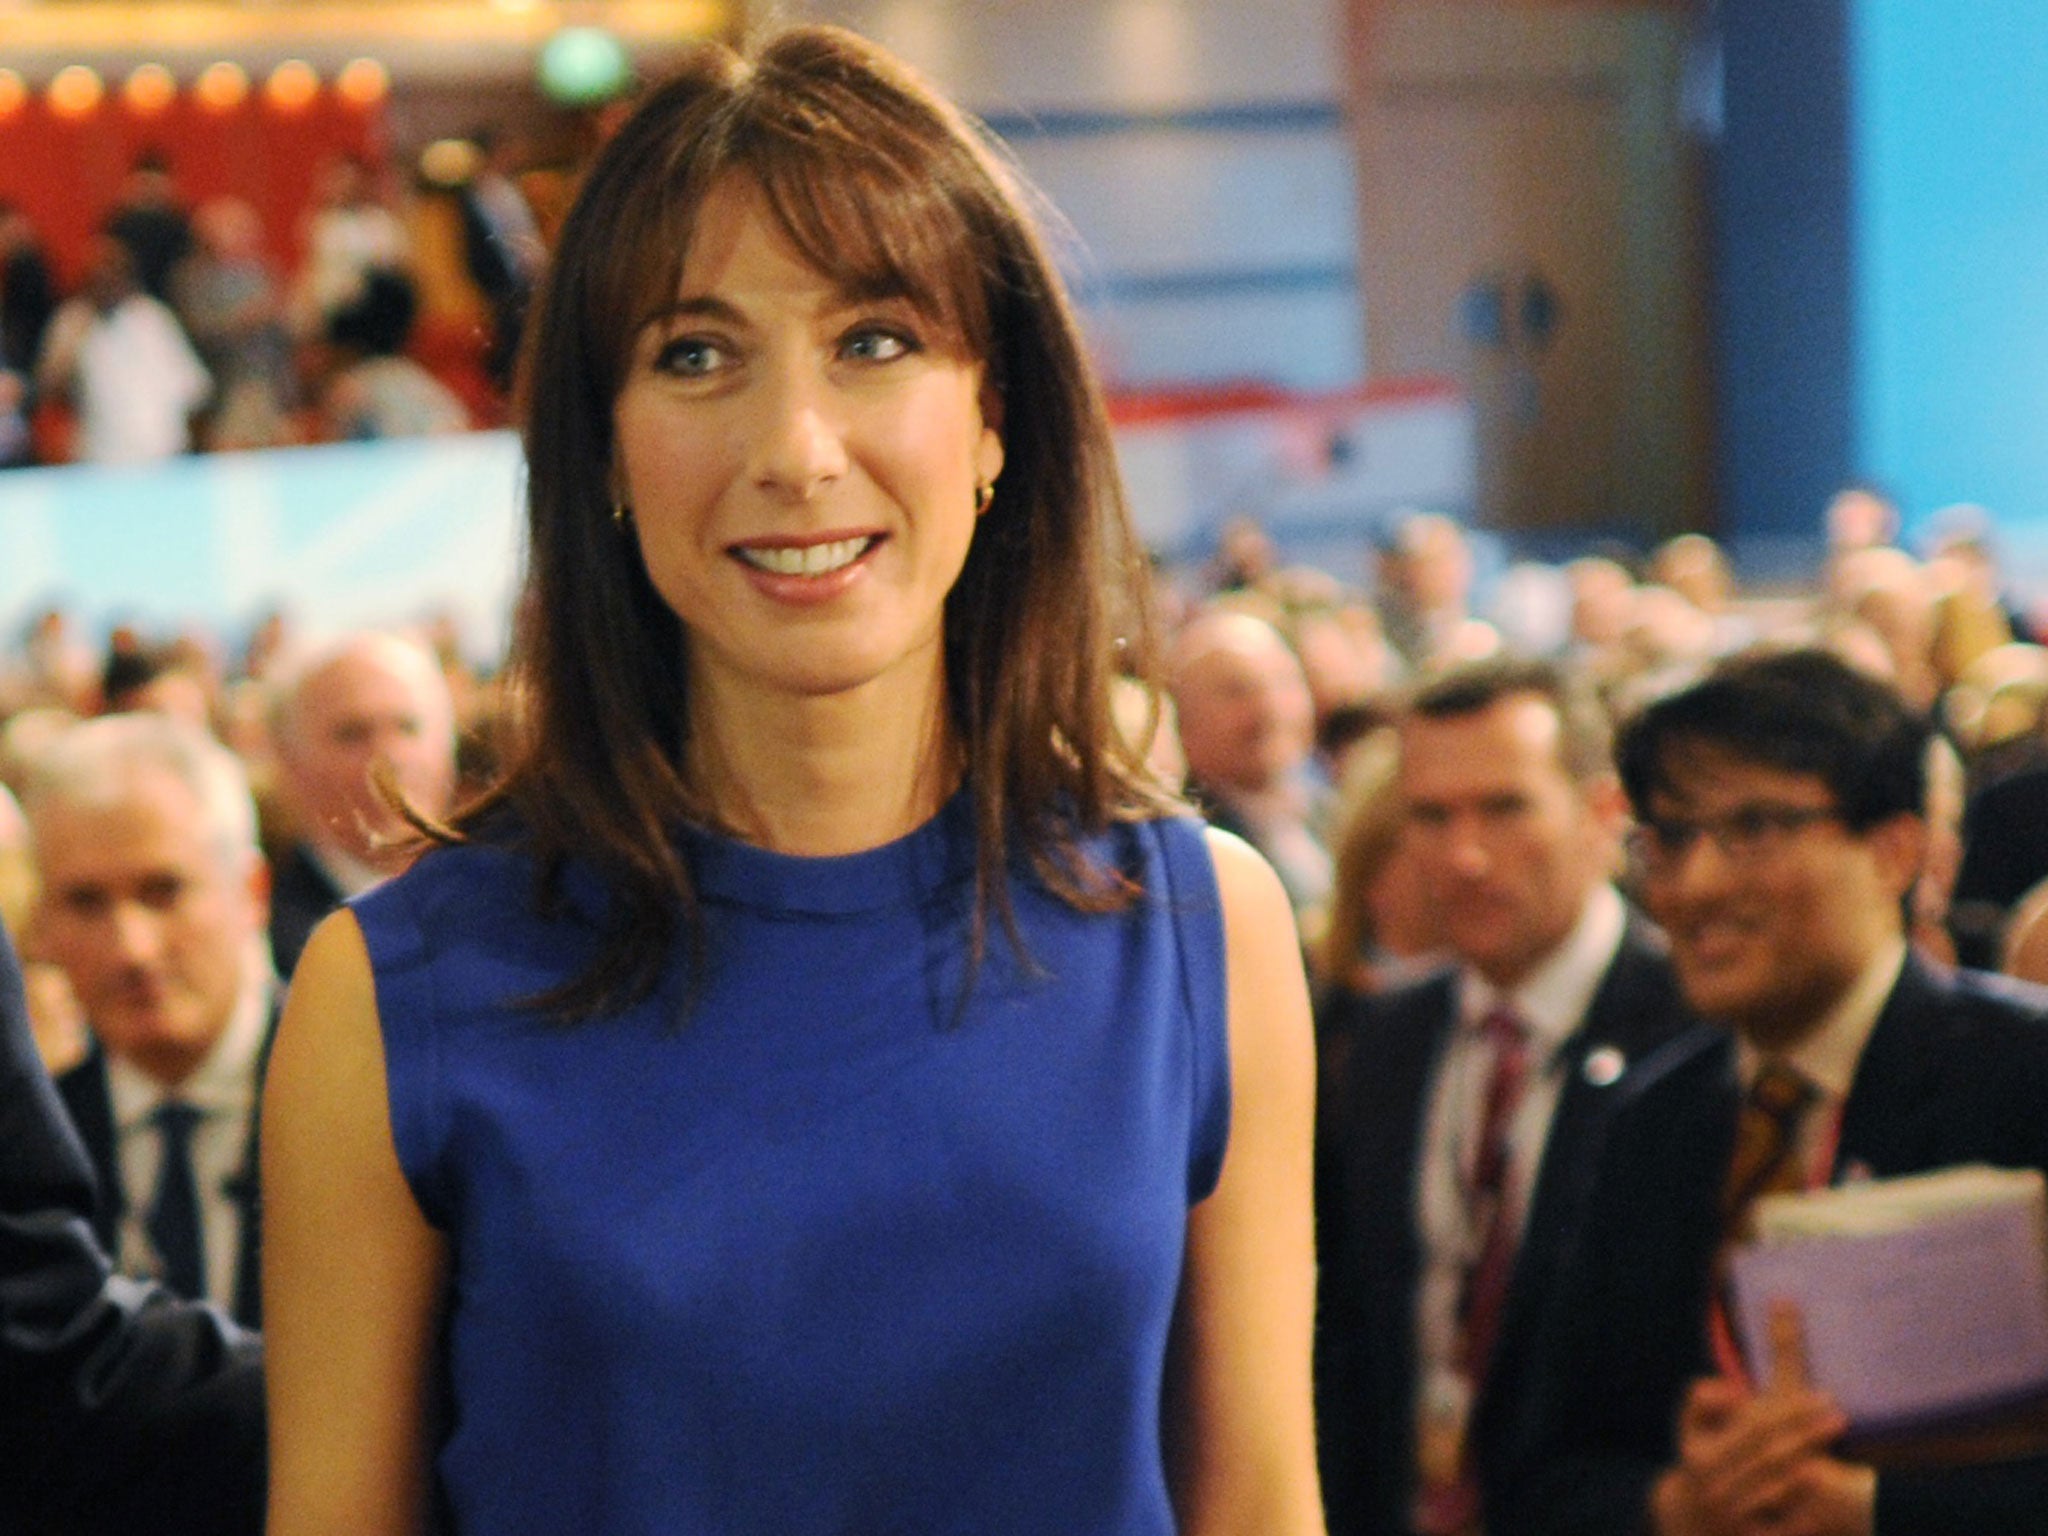 Samantha Cameron has been criticised for urging her husband to intervene in the Syrian civil war